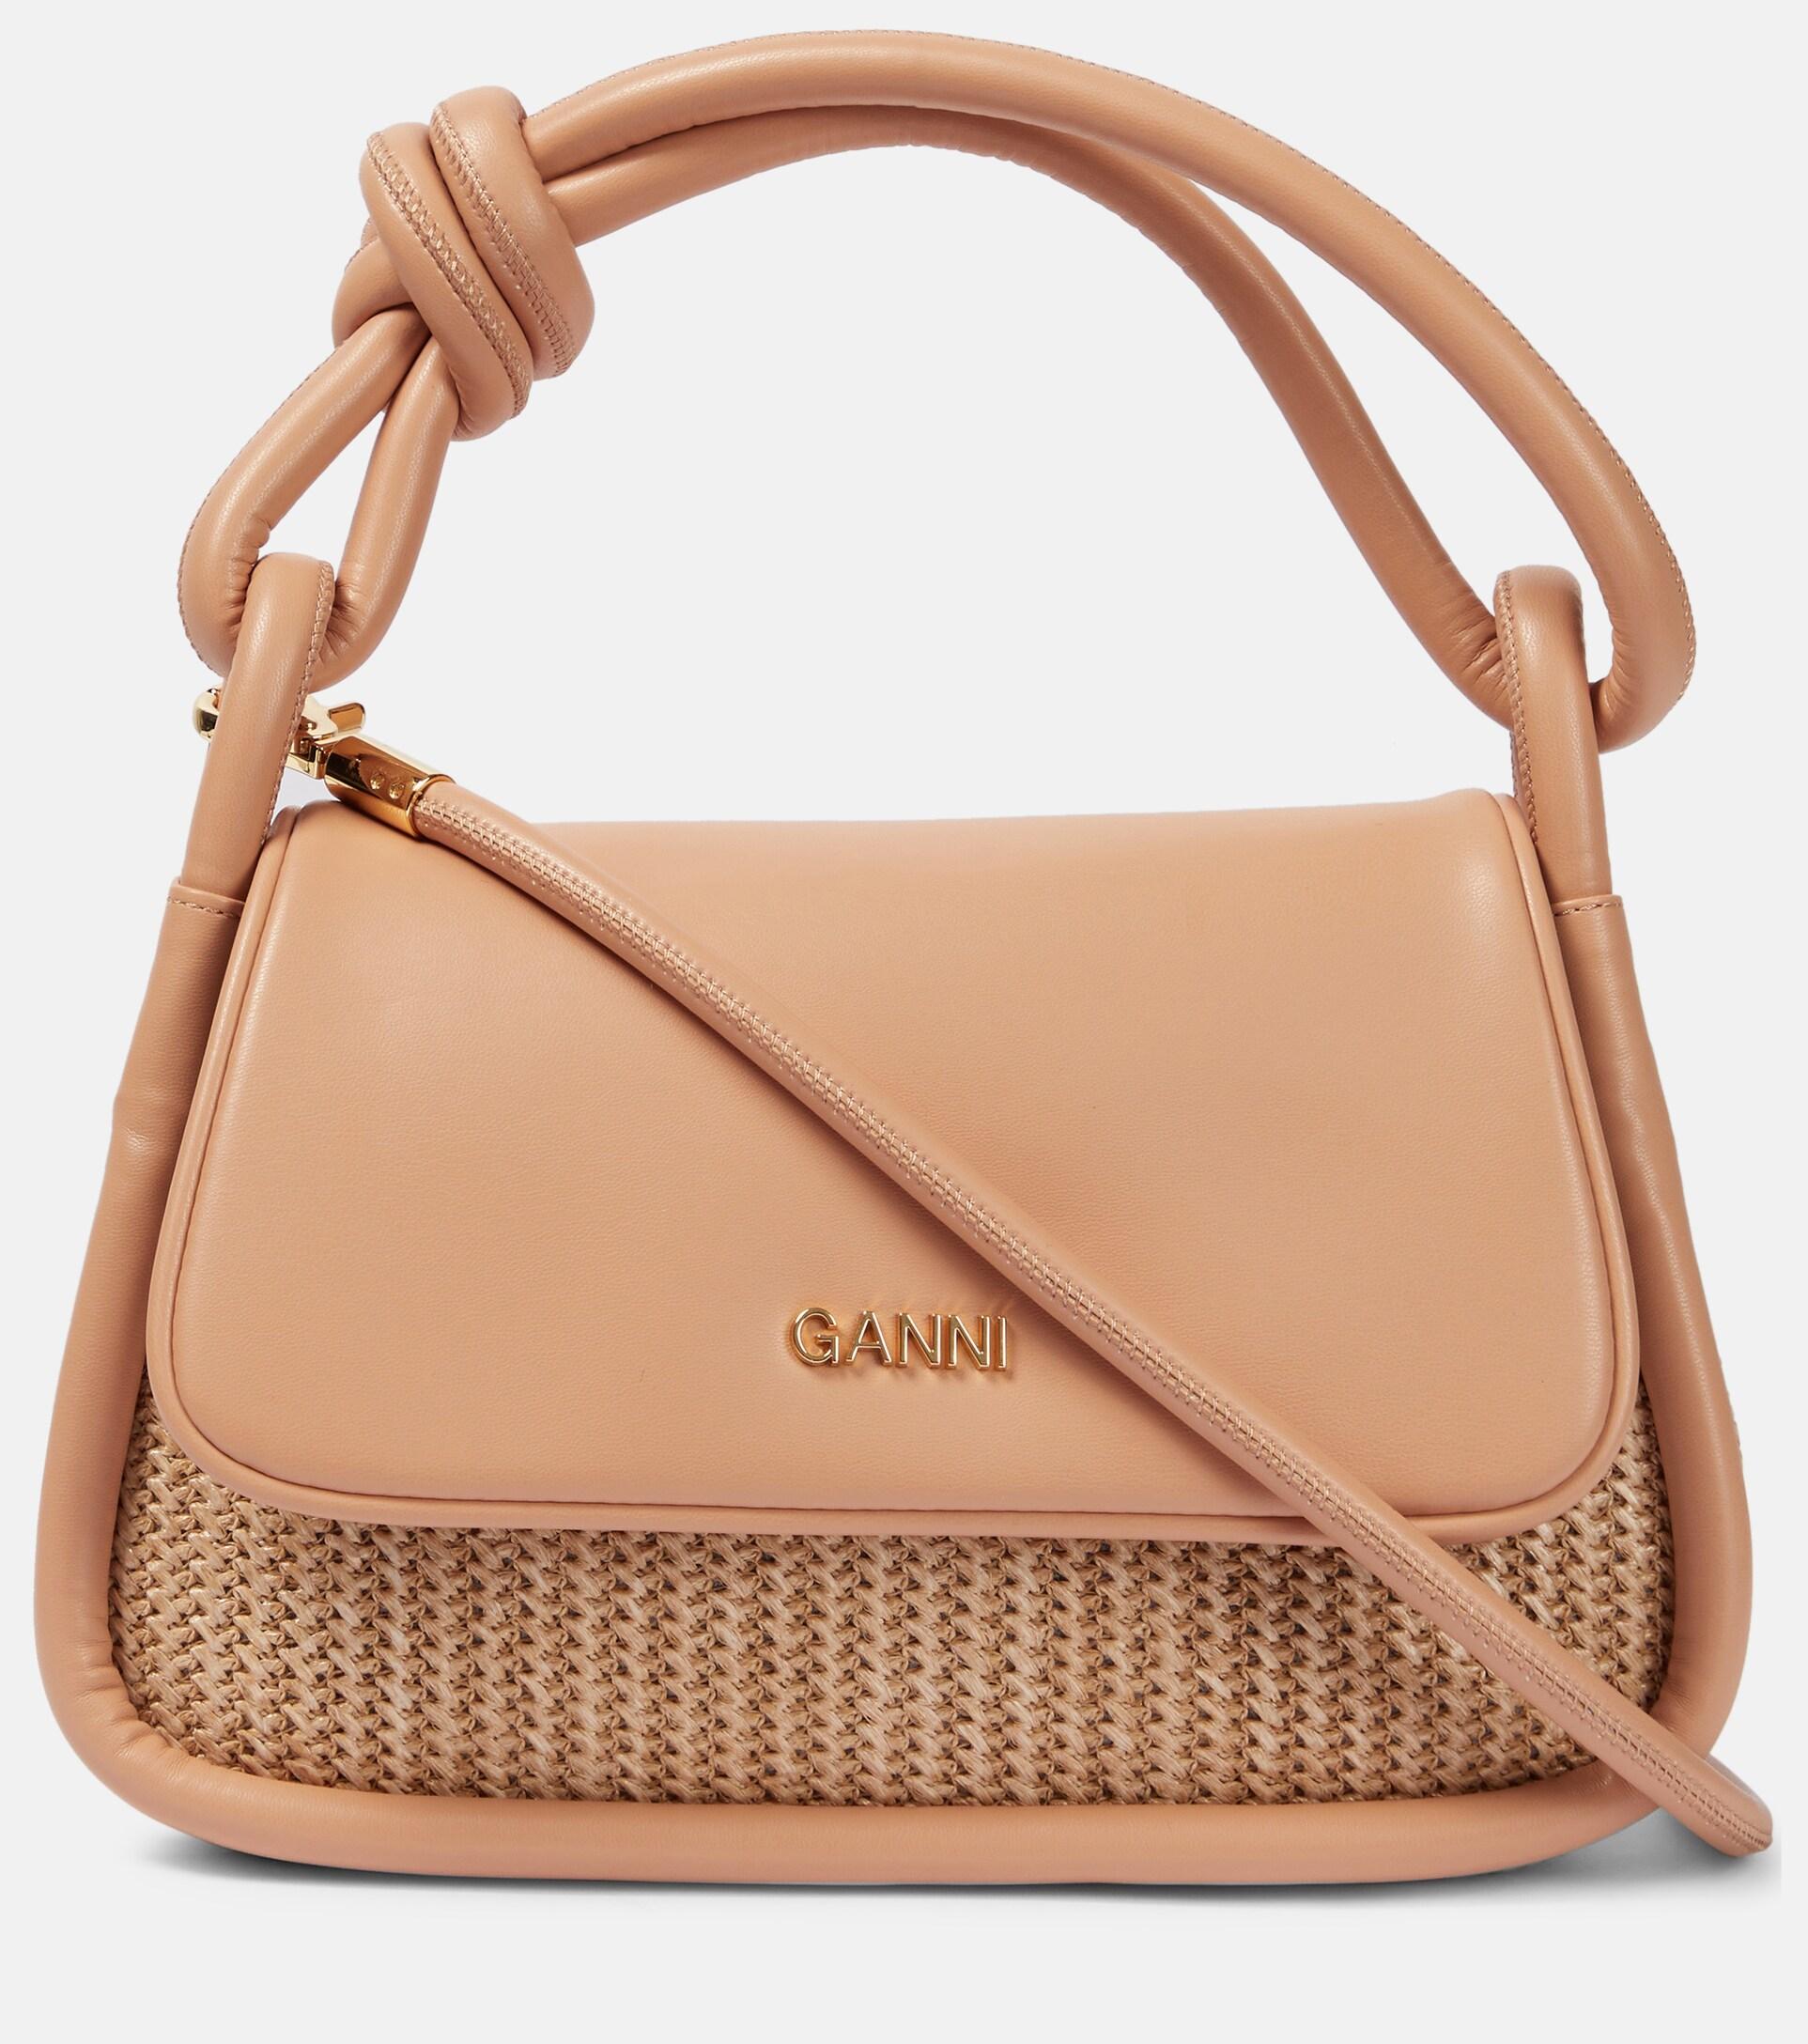 Ganni Knot Flap Over Small Shoulder Bag in Brown | Lyst